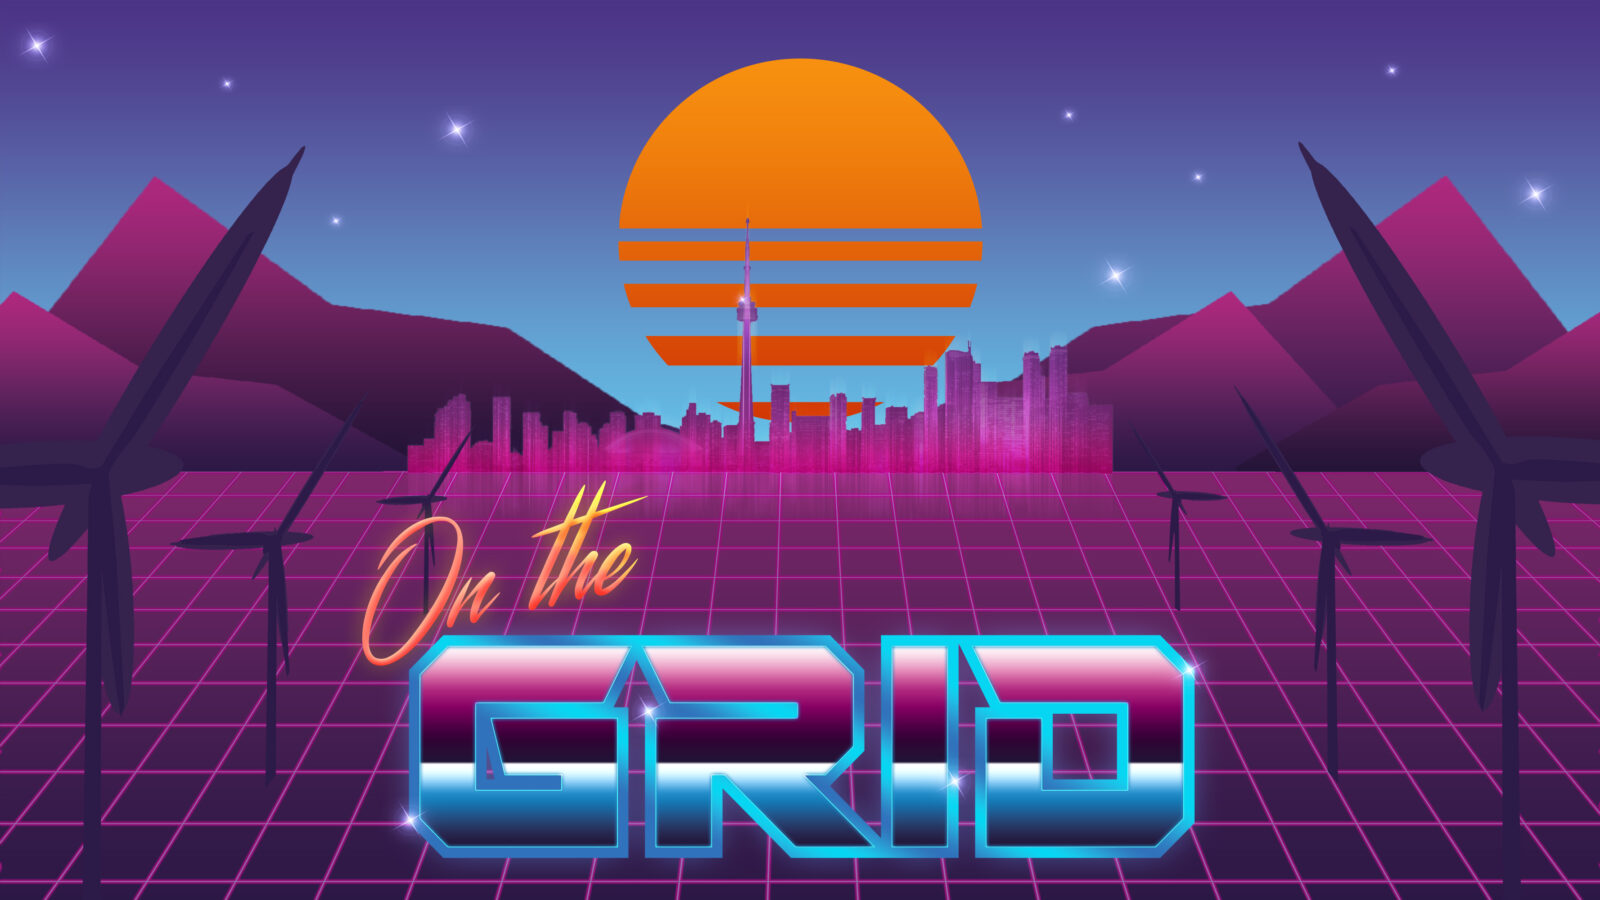 An 80s vaporwave or arcade style illustration opens with the the words On the Grid. Wind turbines line the sides, drawing us towards the illuminated city set between mountains with the sun sinking behind it. Stars twinkle in the sky.